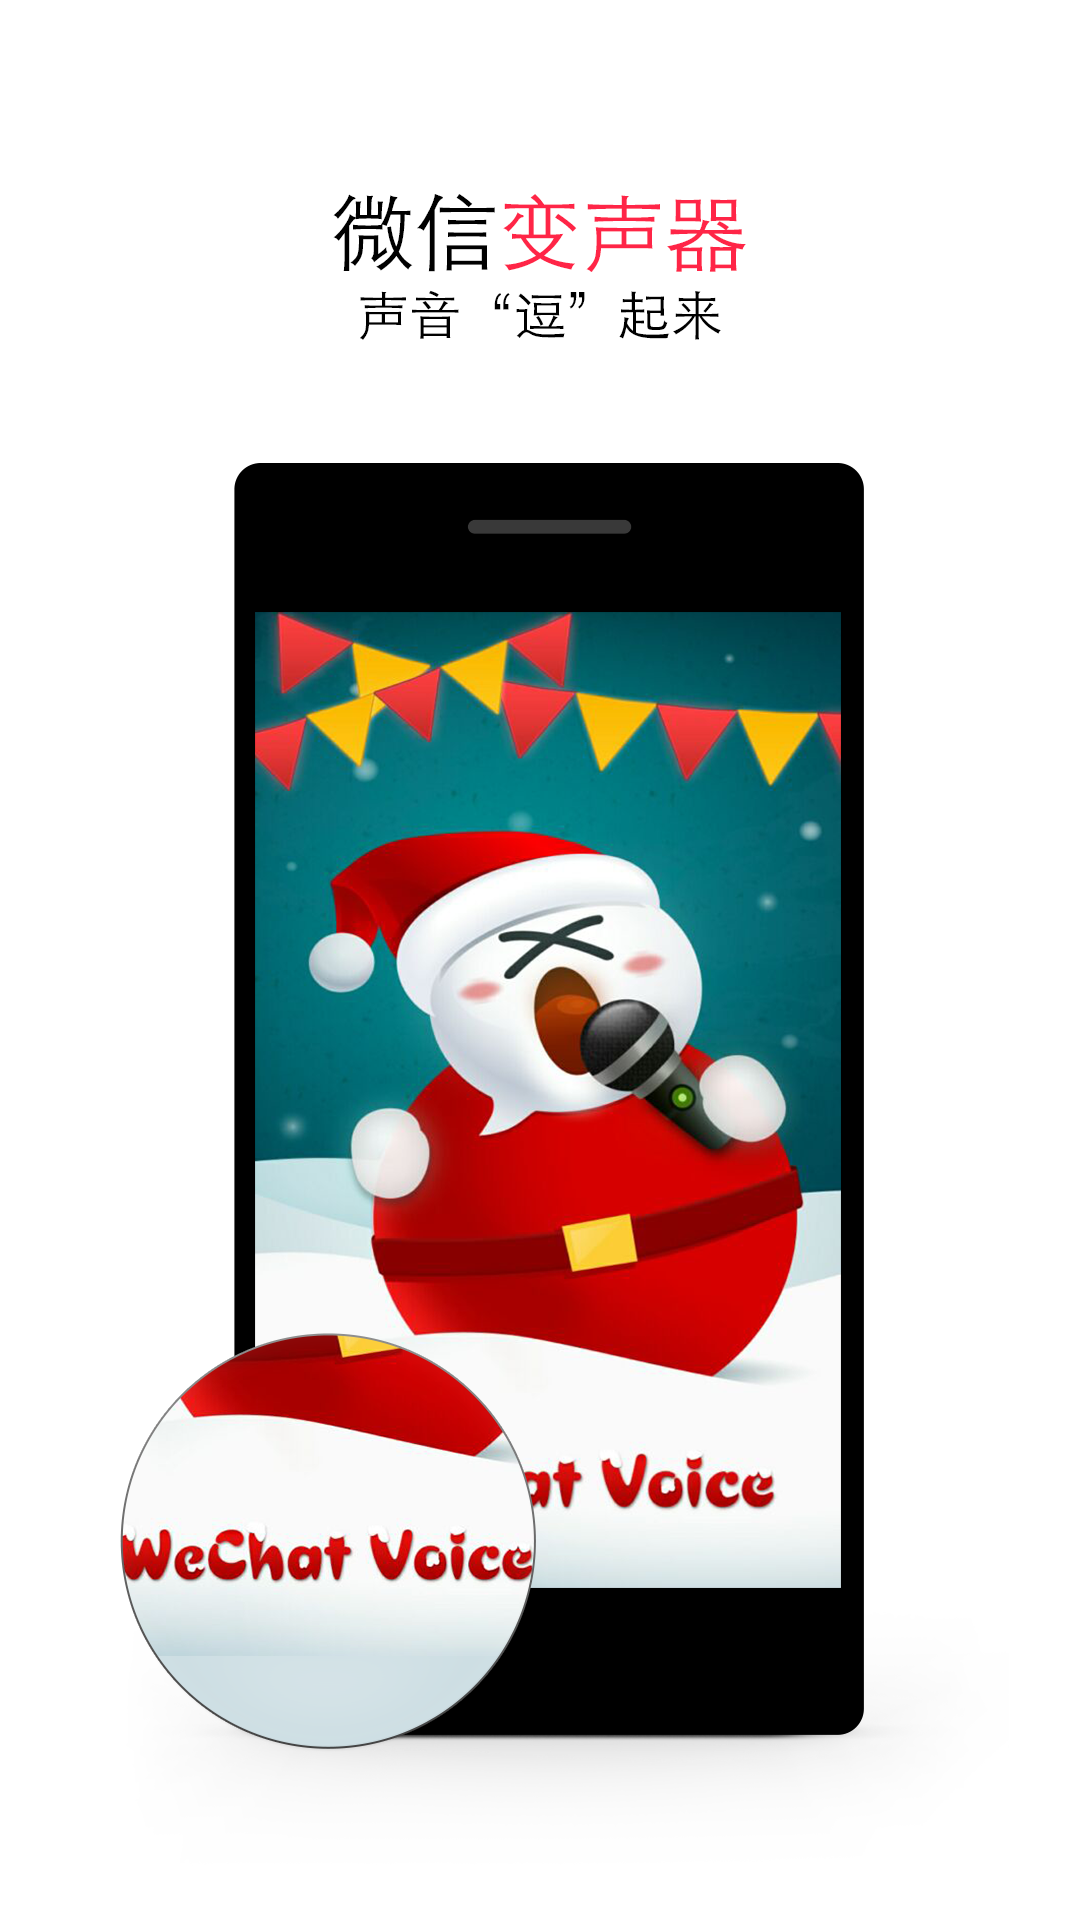 Android application WeChat Voice screenshort